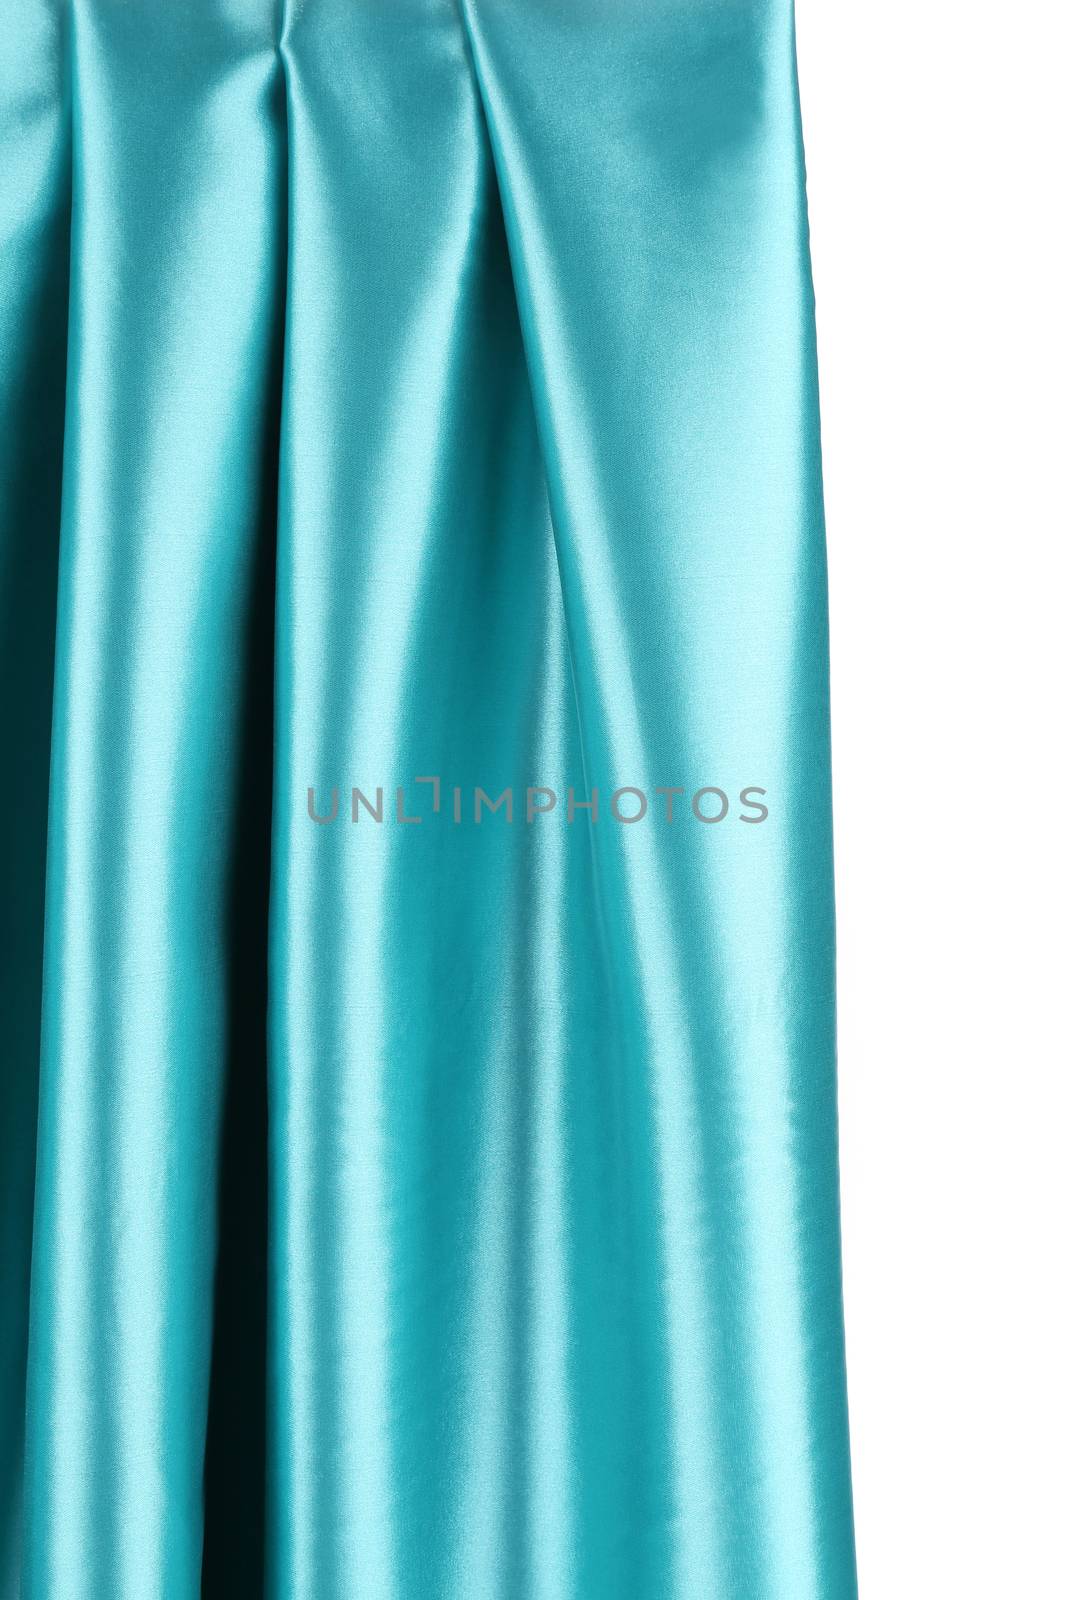 Creases in blue fabric. by indigolotos